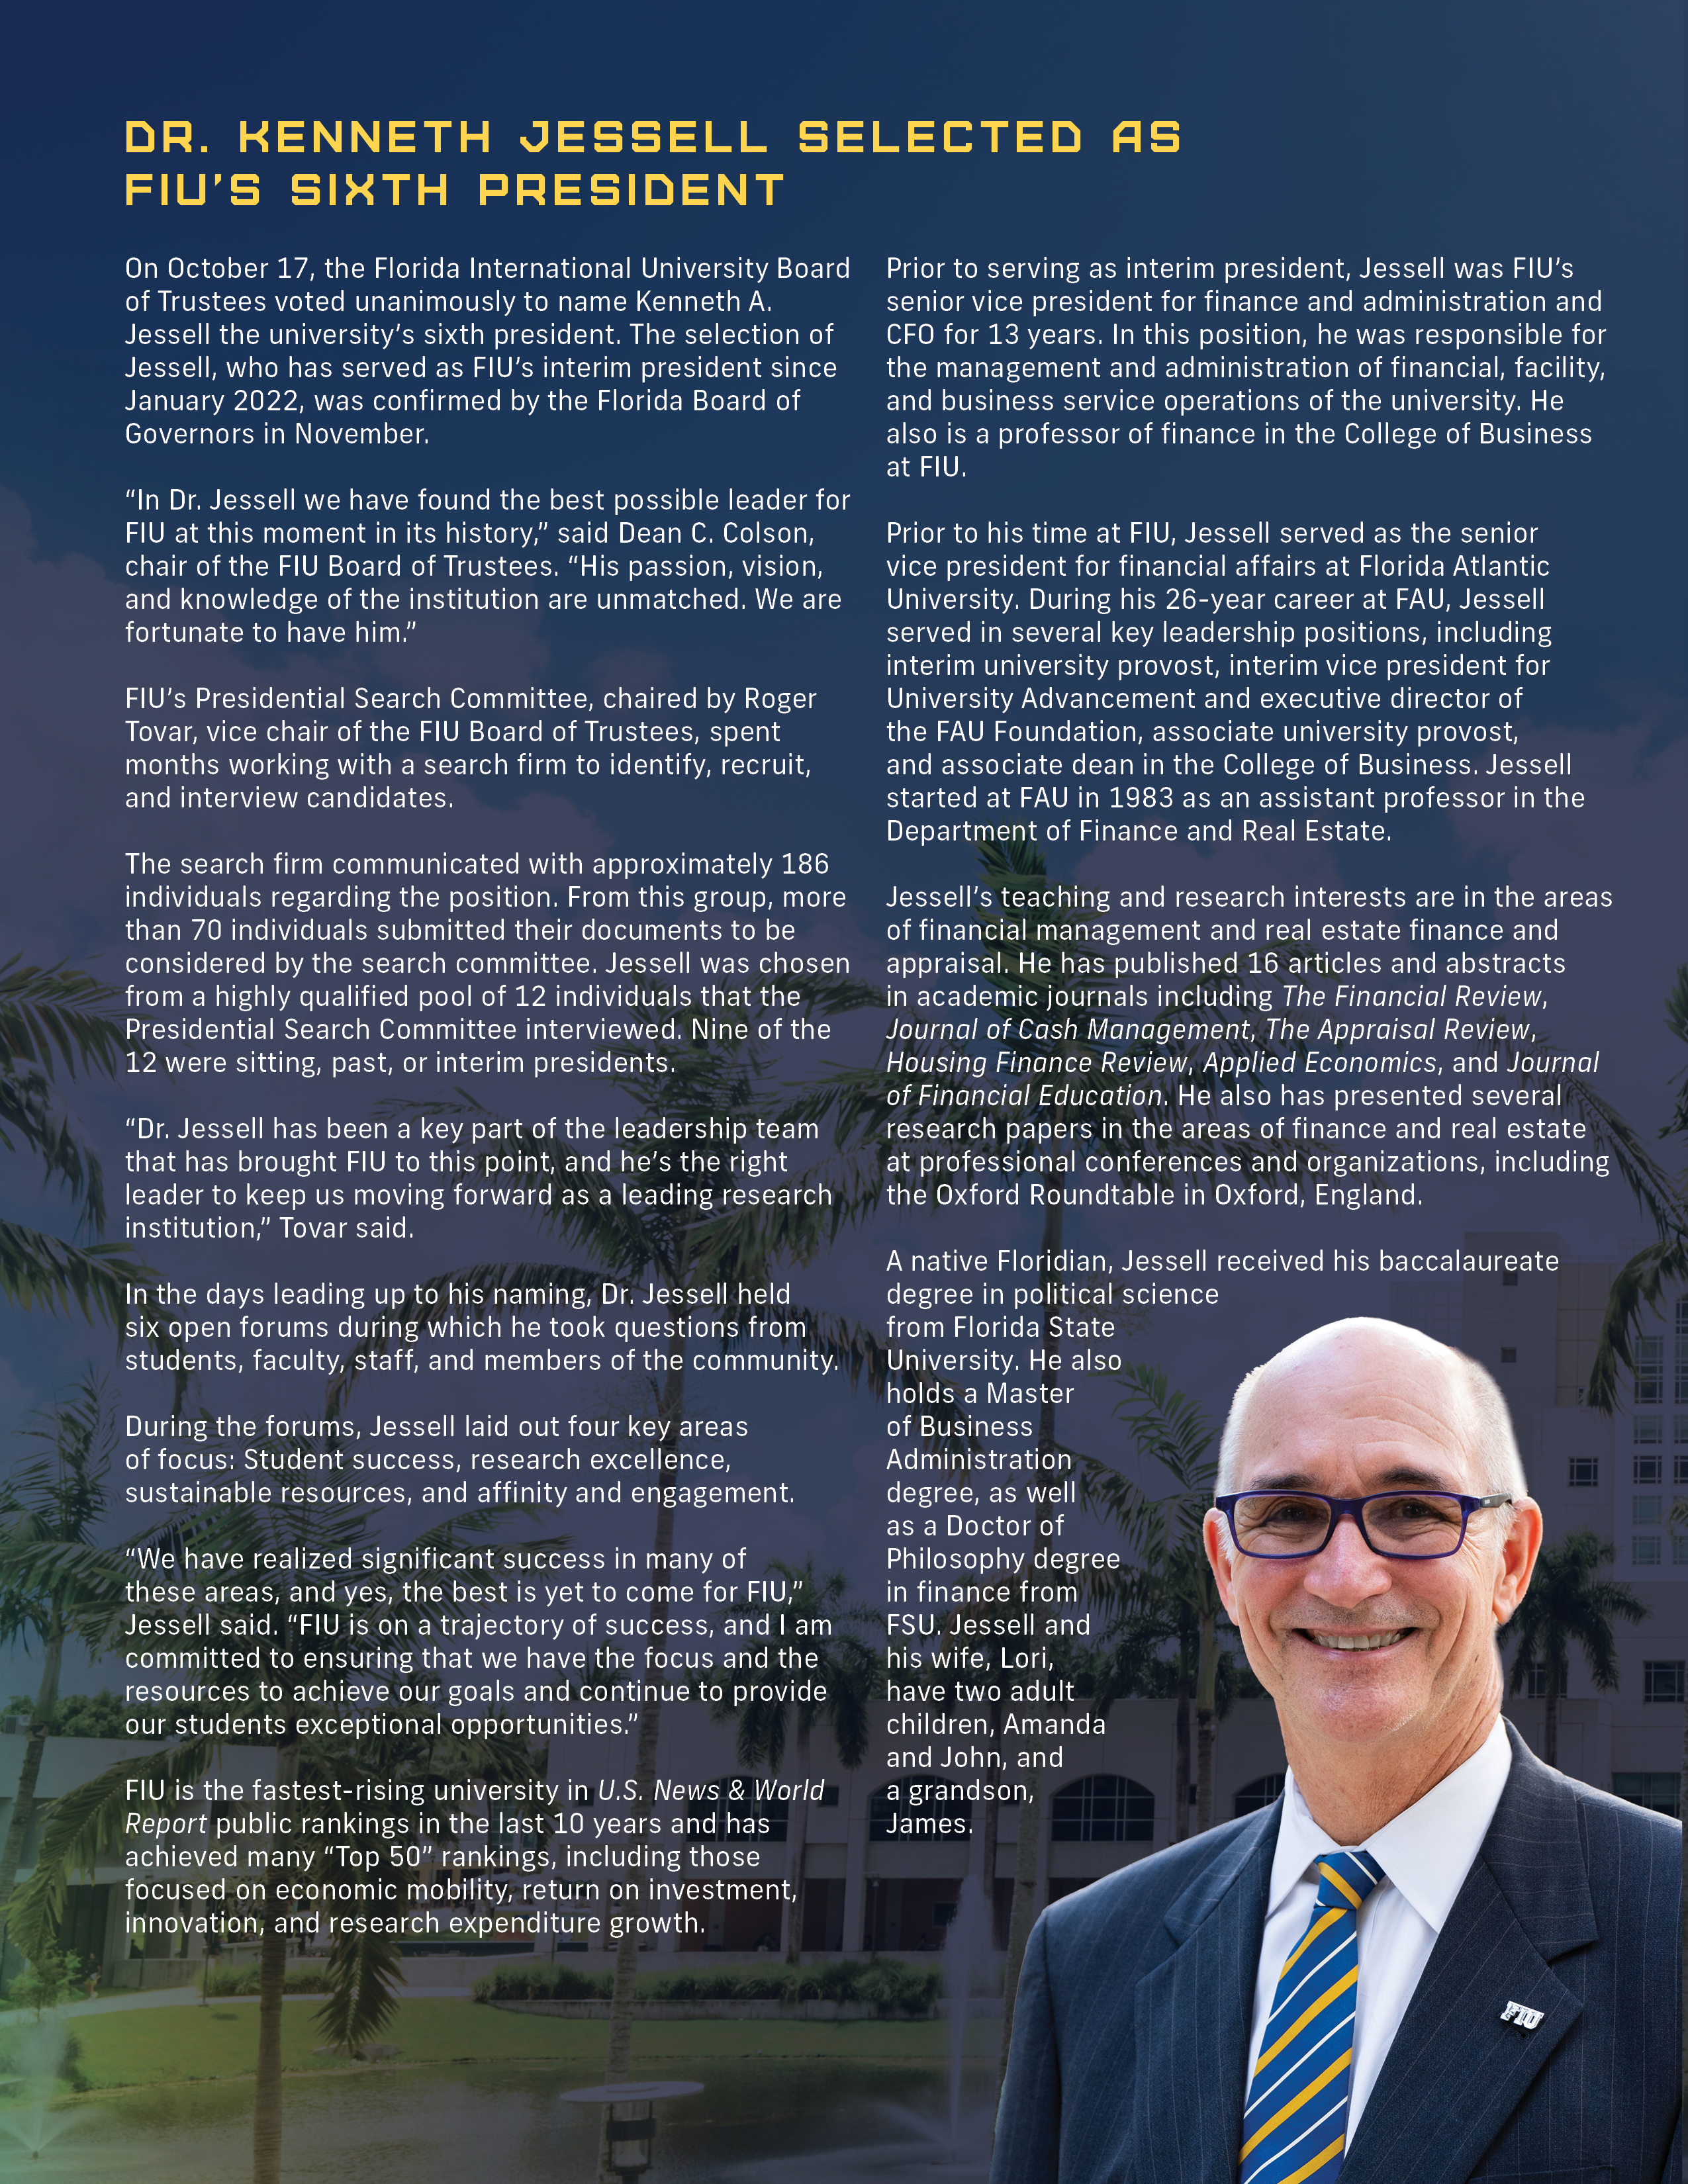 Dr. Kenneth Jessell Selected as FIU's Sixth President